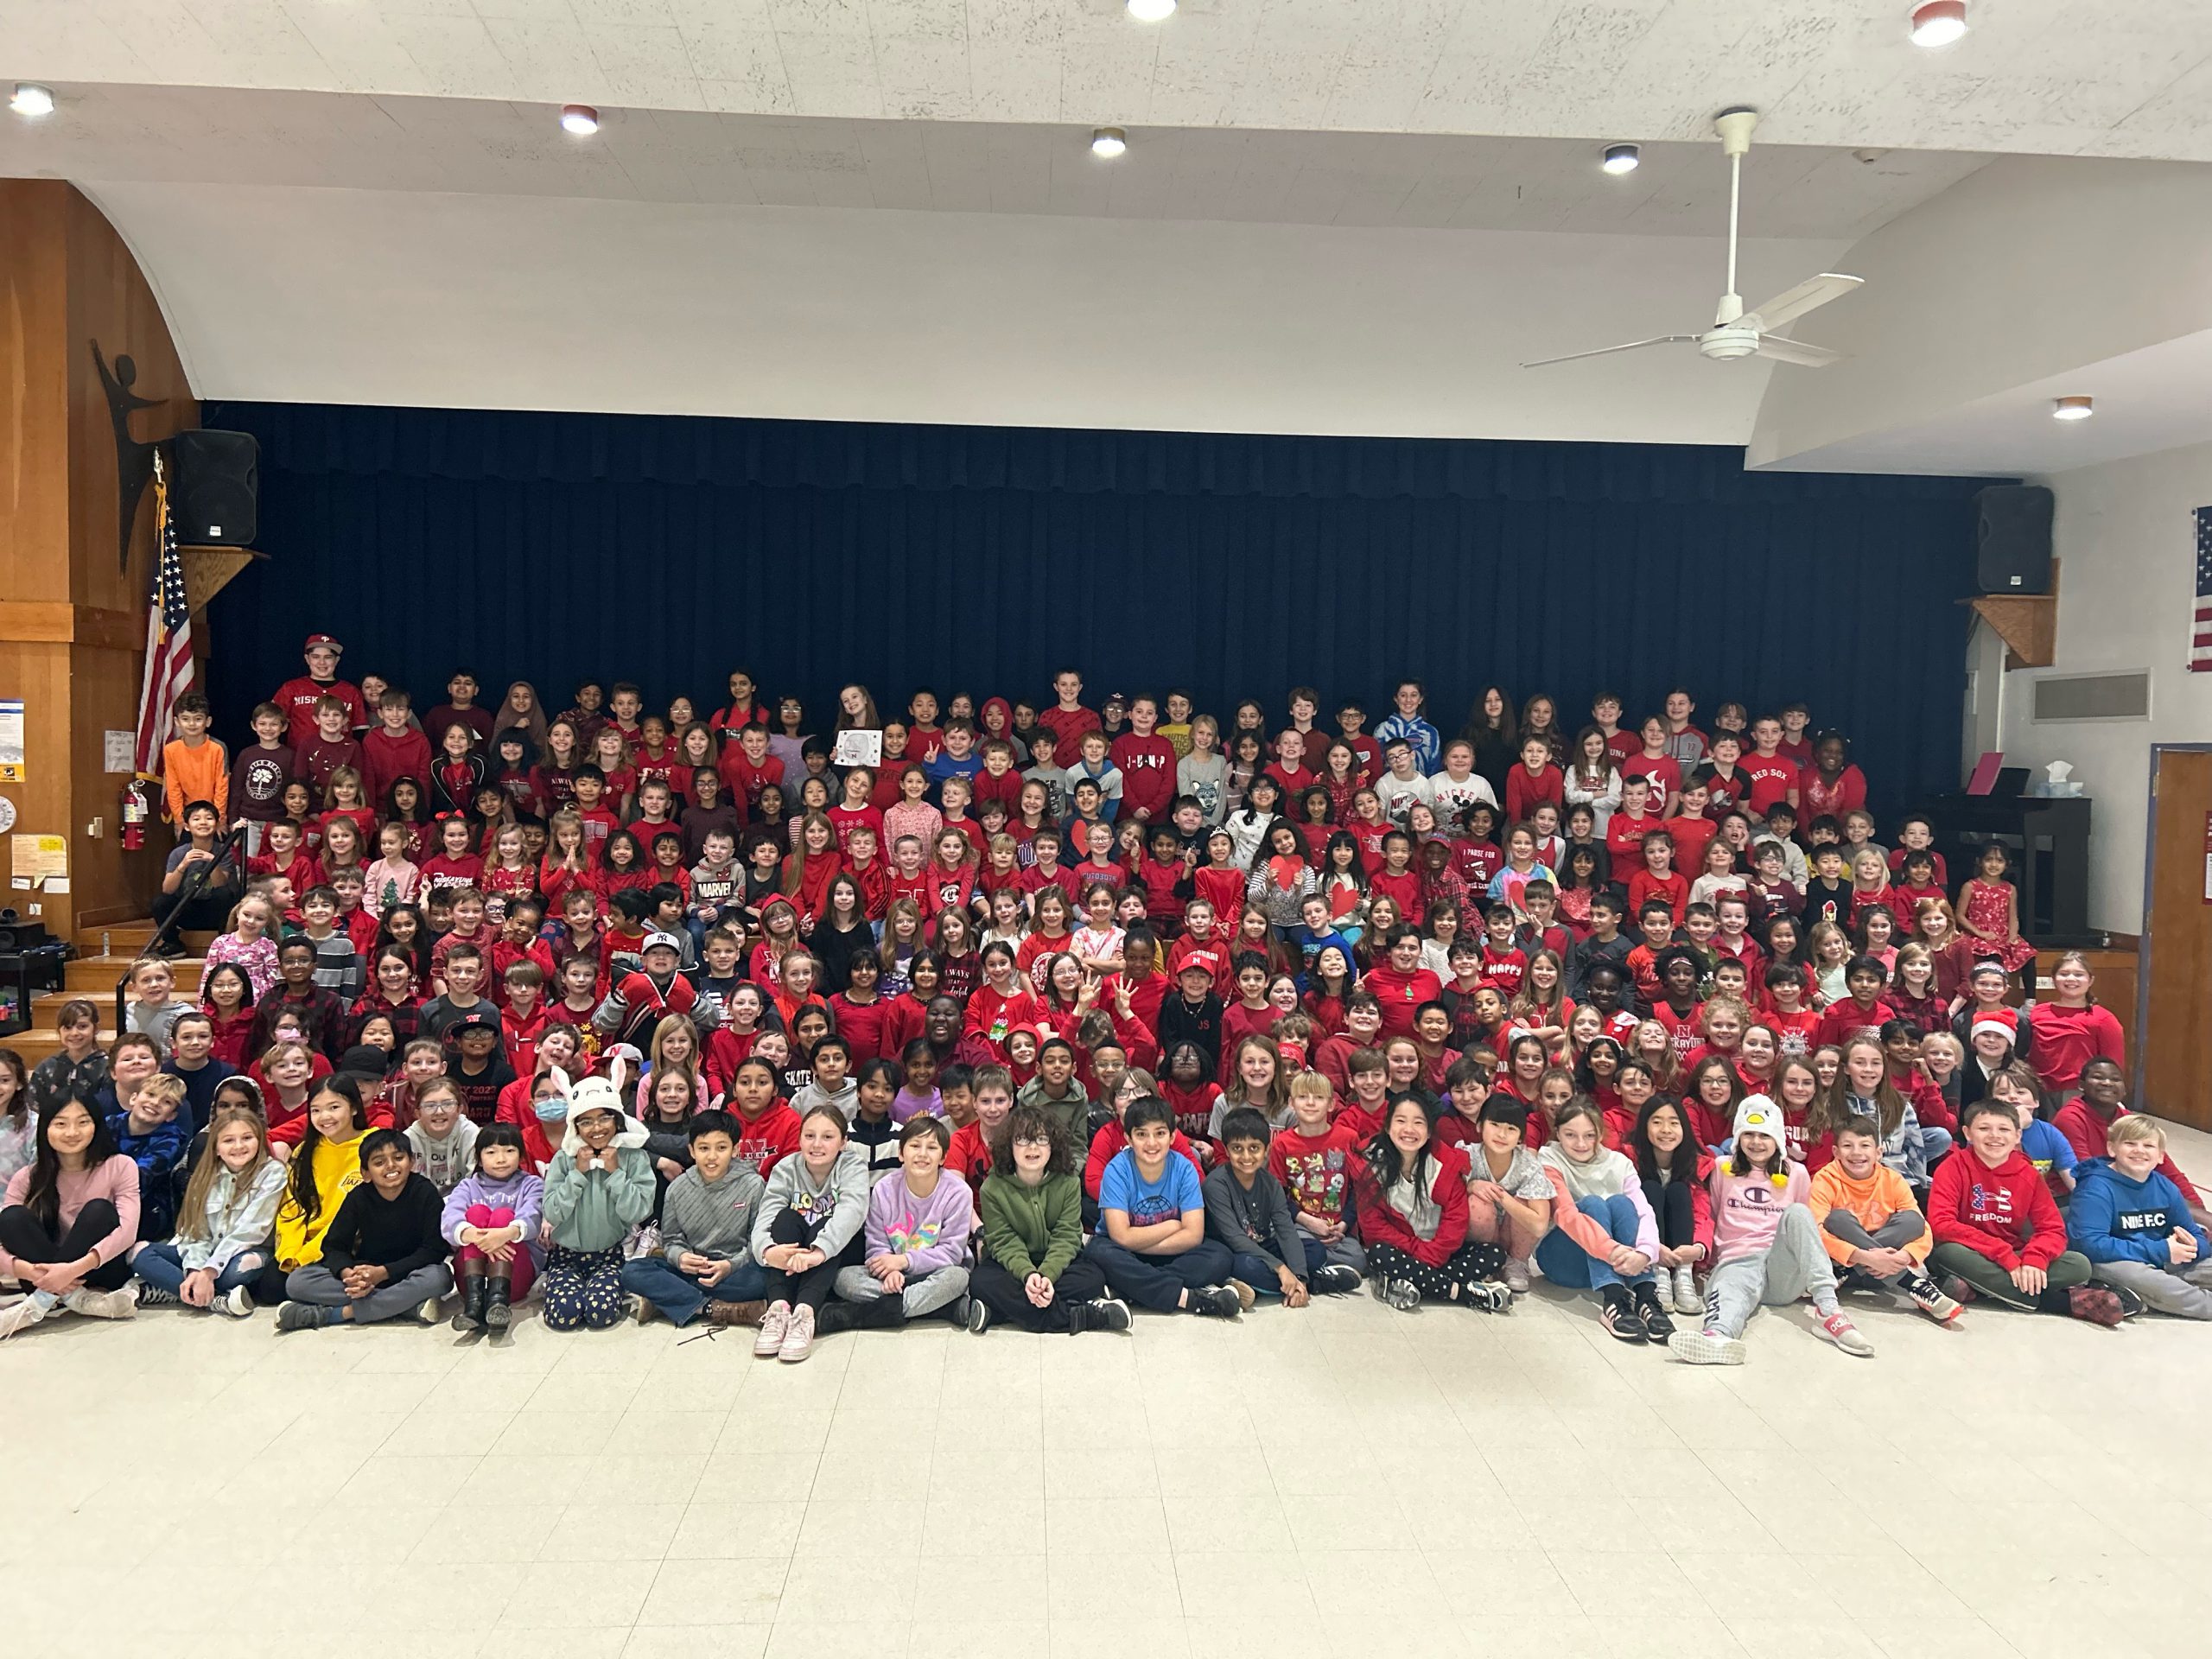 Birchwood Elementary School students wear red and gather for a photo in support of 4th grader Jack Salinetti, who is fighting leukemia.